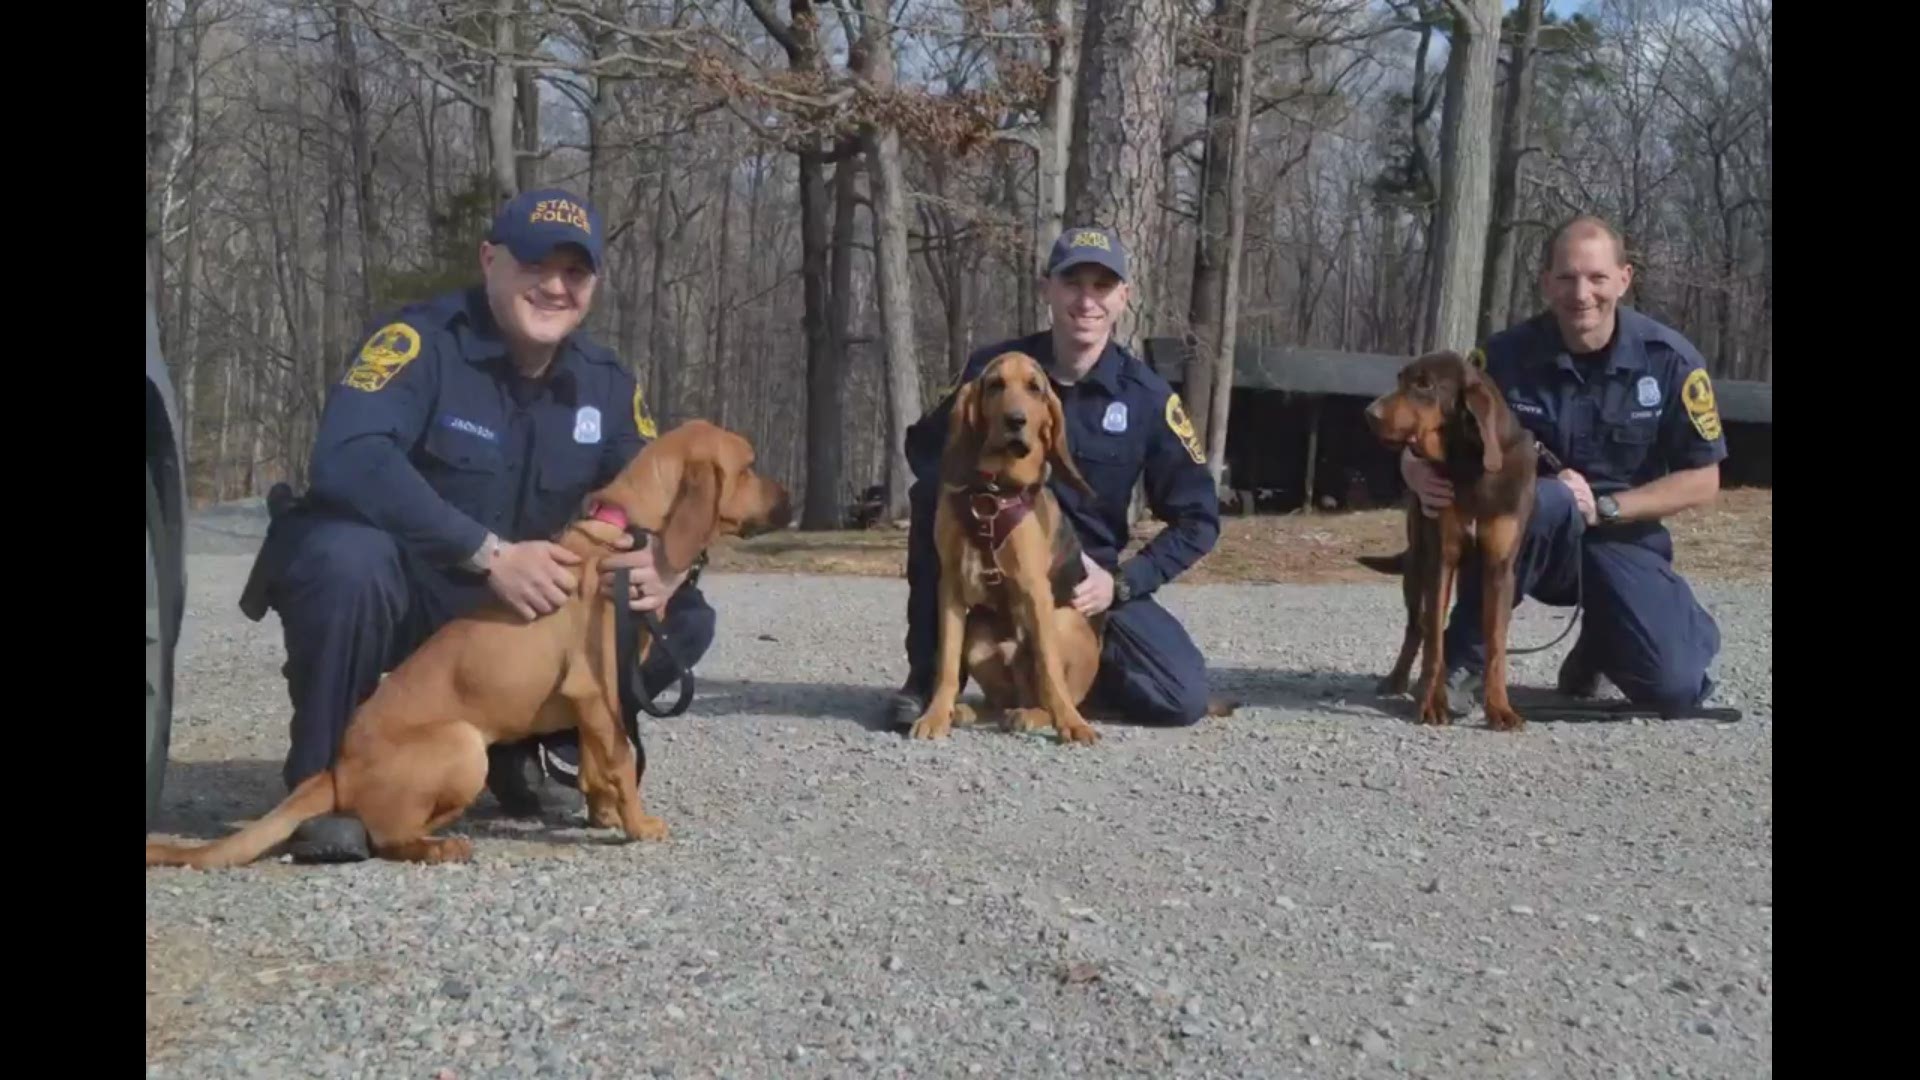 Virginia State Police's Bloodhound Tracking Training started March 18 for three pups Justice, Liberty, and Gus! Video courtesy of Virginia State Police.